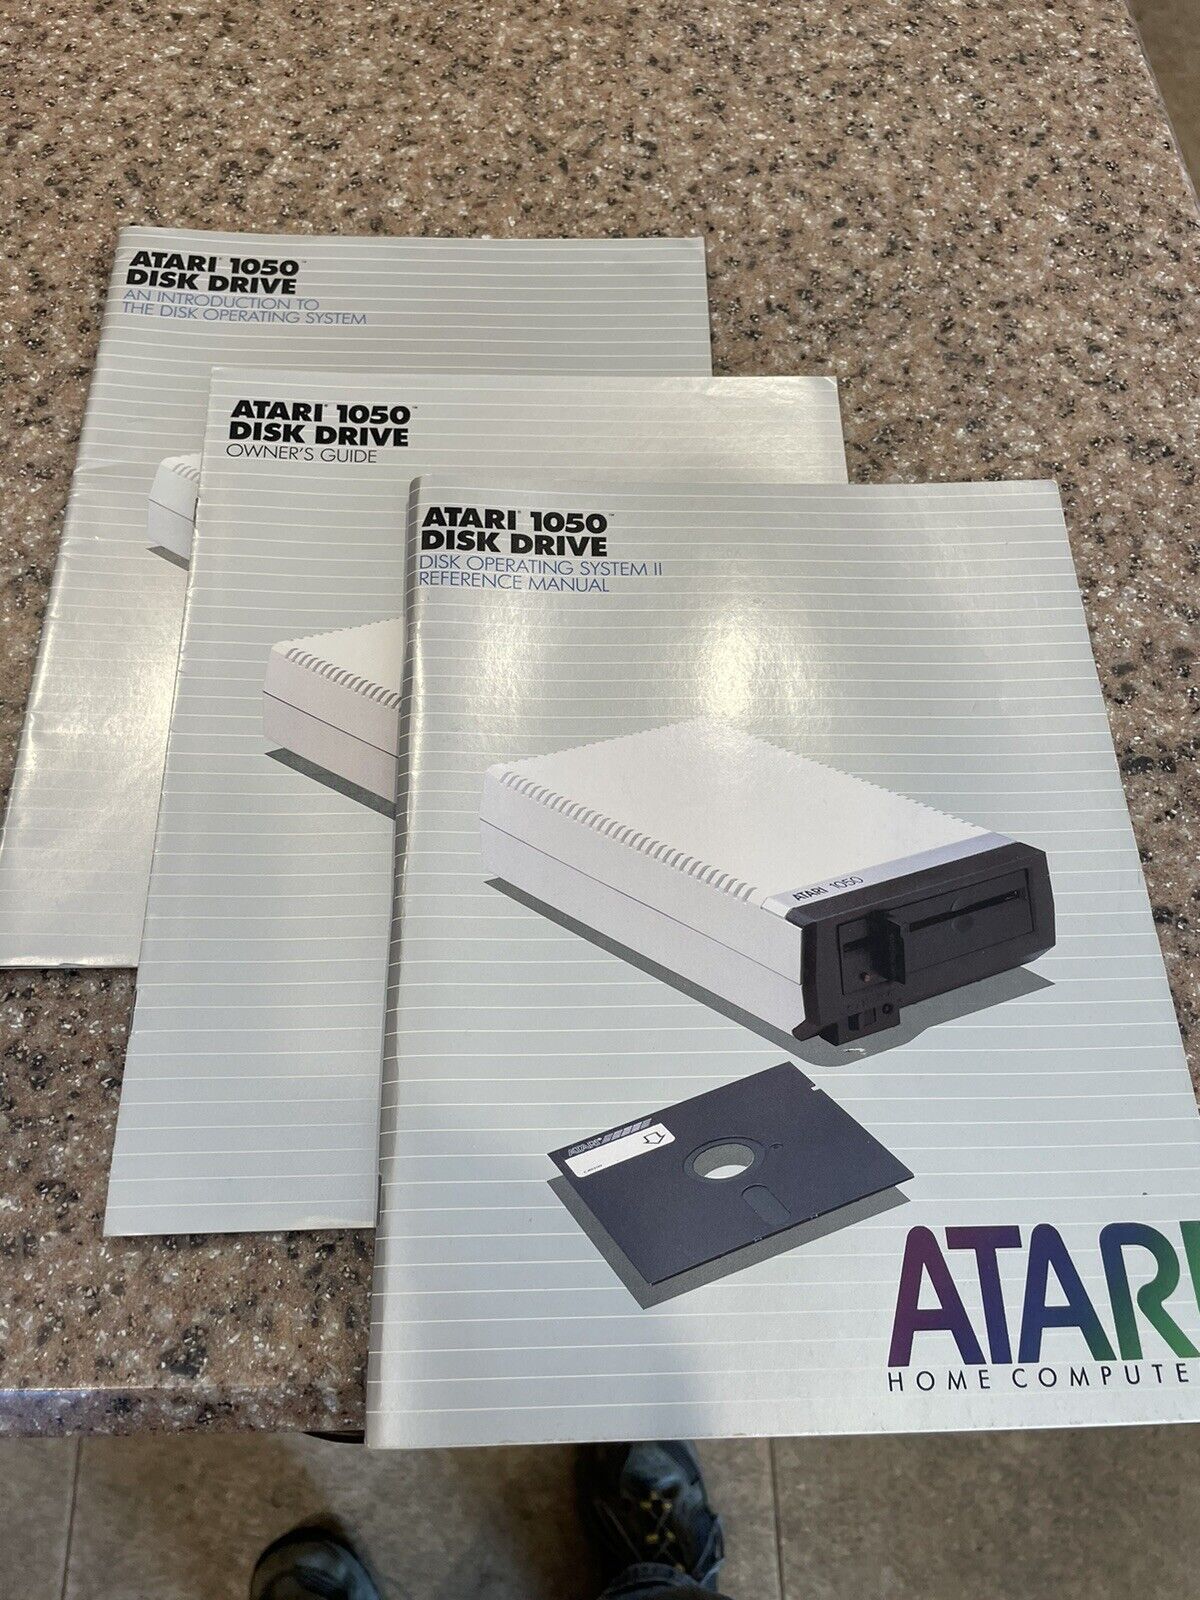 Atari 1050 Disk Drive Intro To System Ref. Manual Owners Guide 1982  - 3 Books